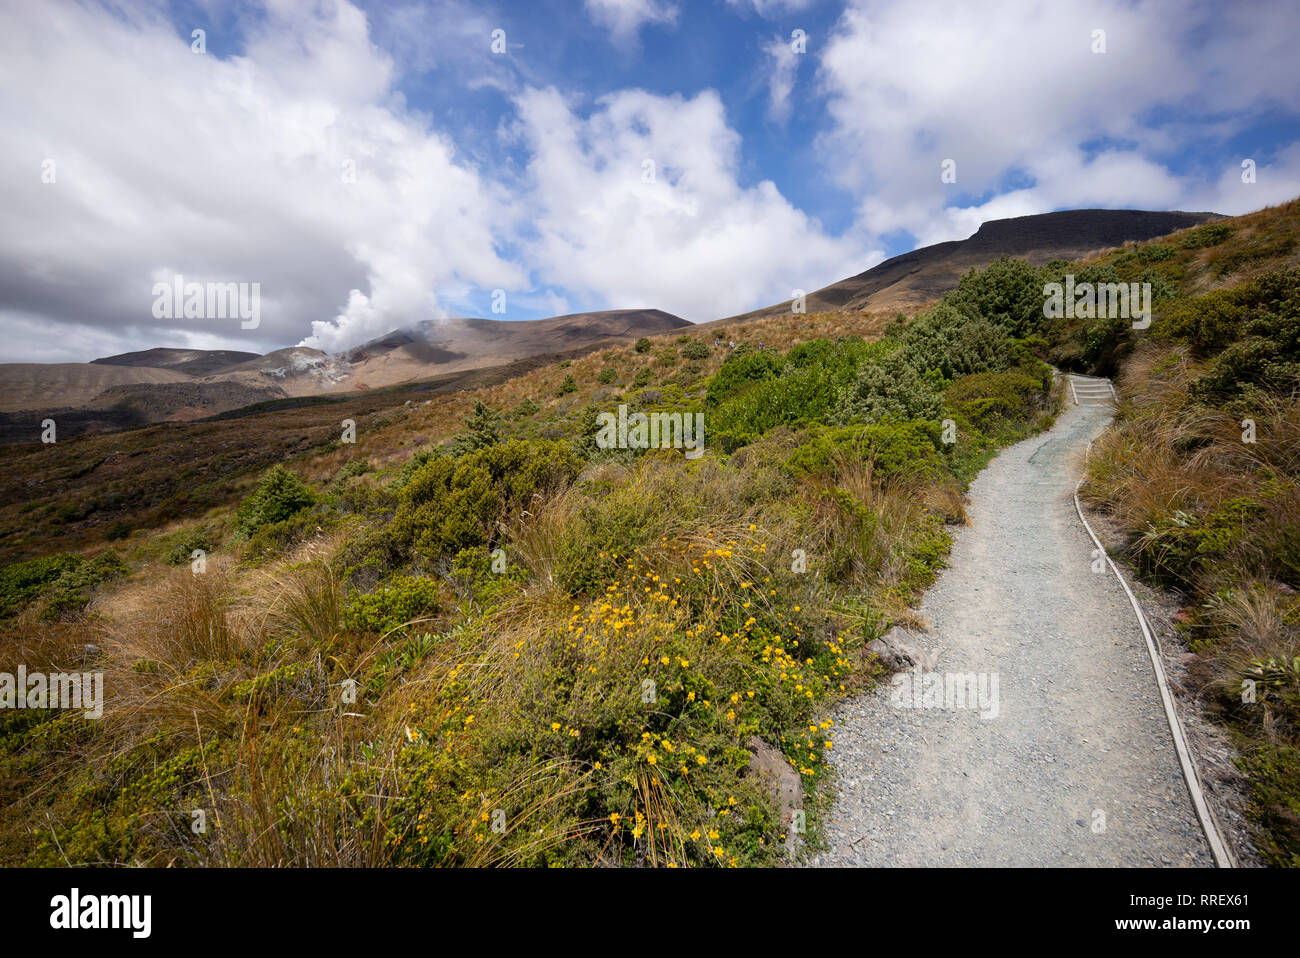 The landscape of the Tongariro walking route, New Zealand. Stock Photo